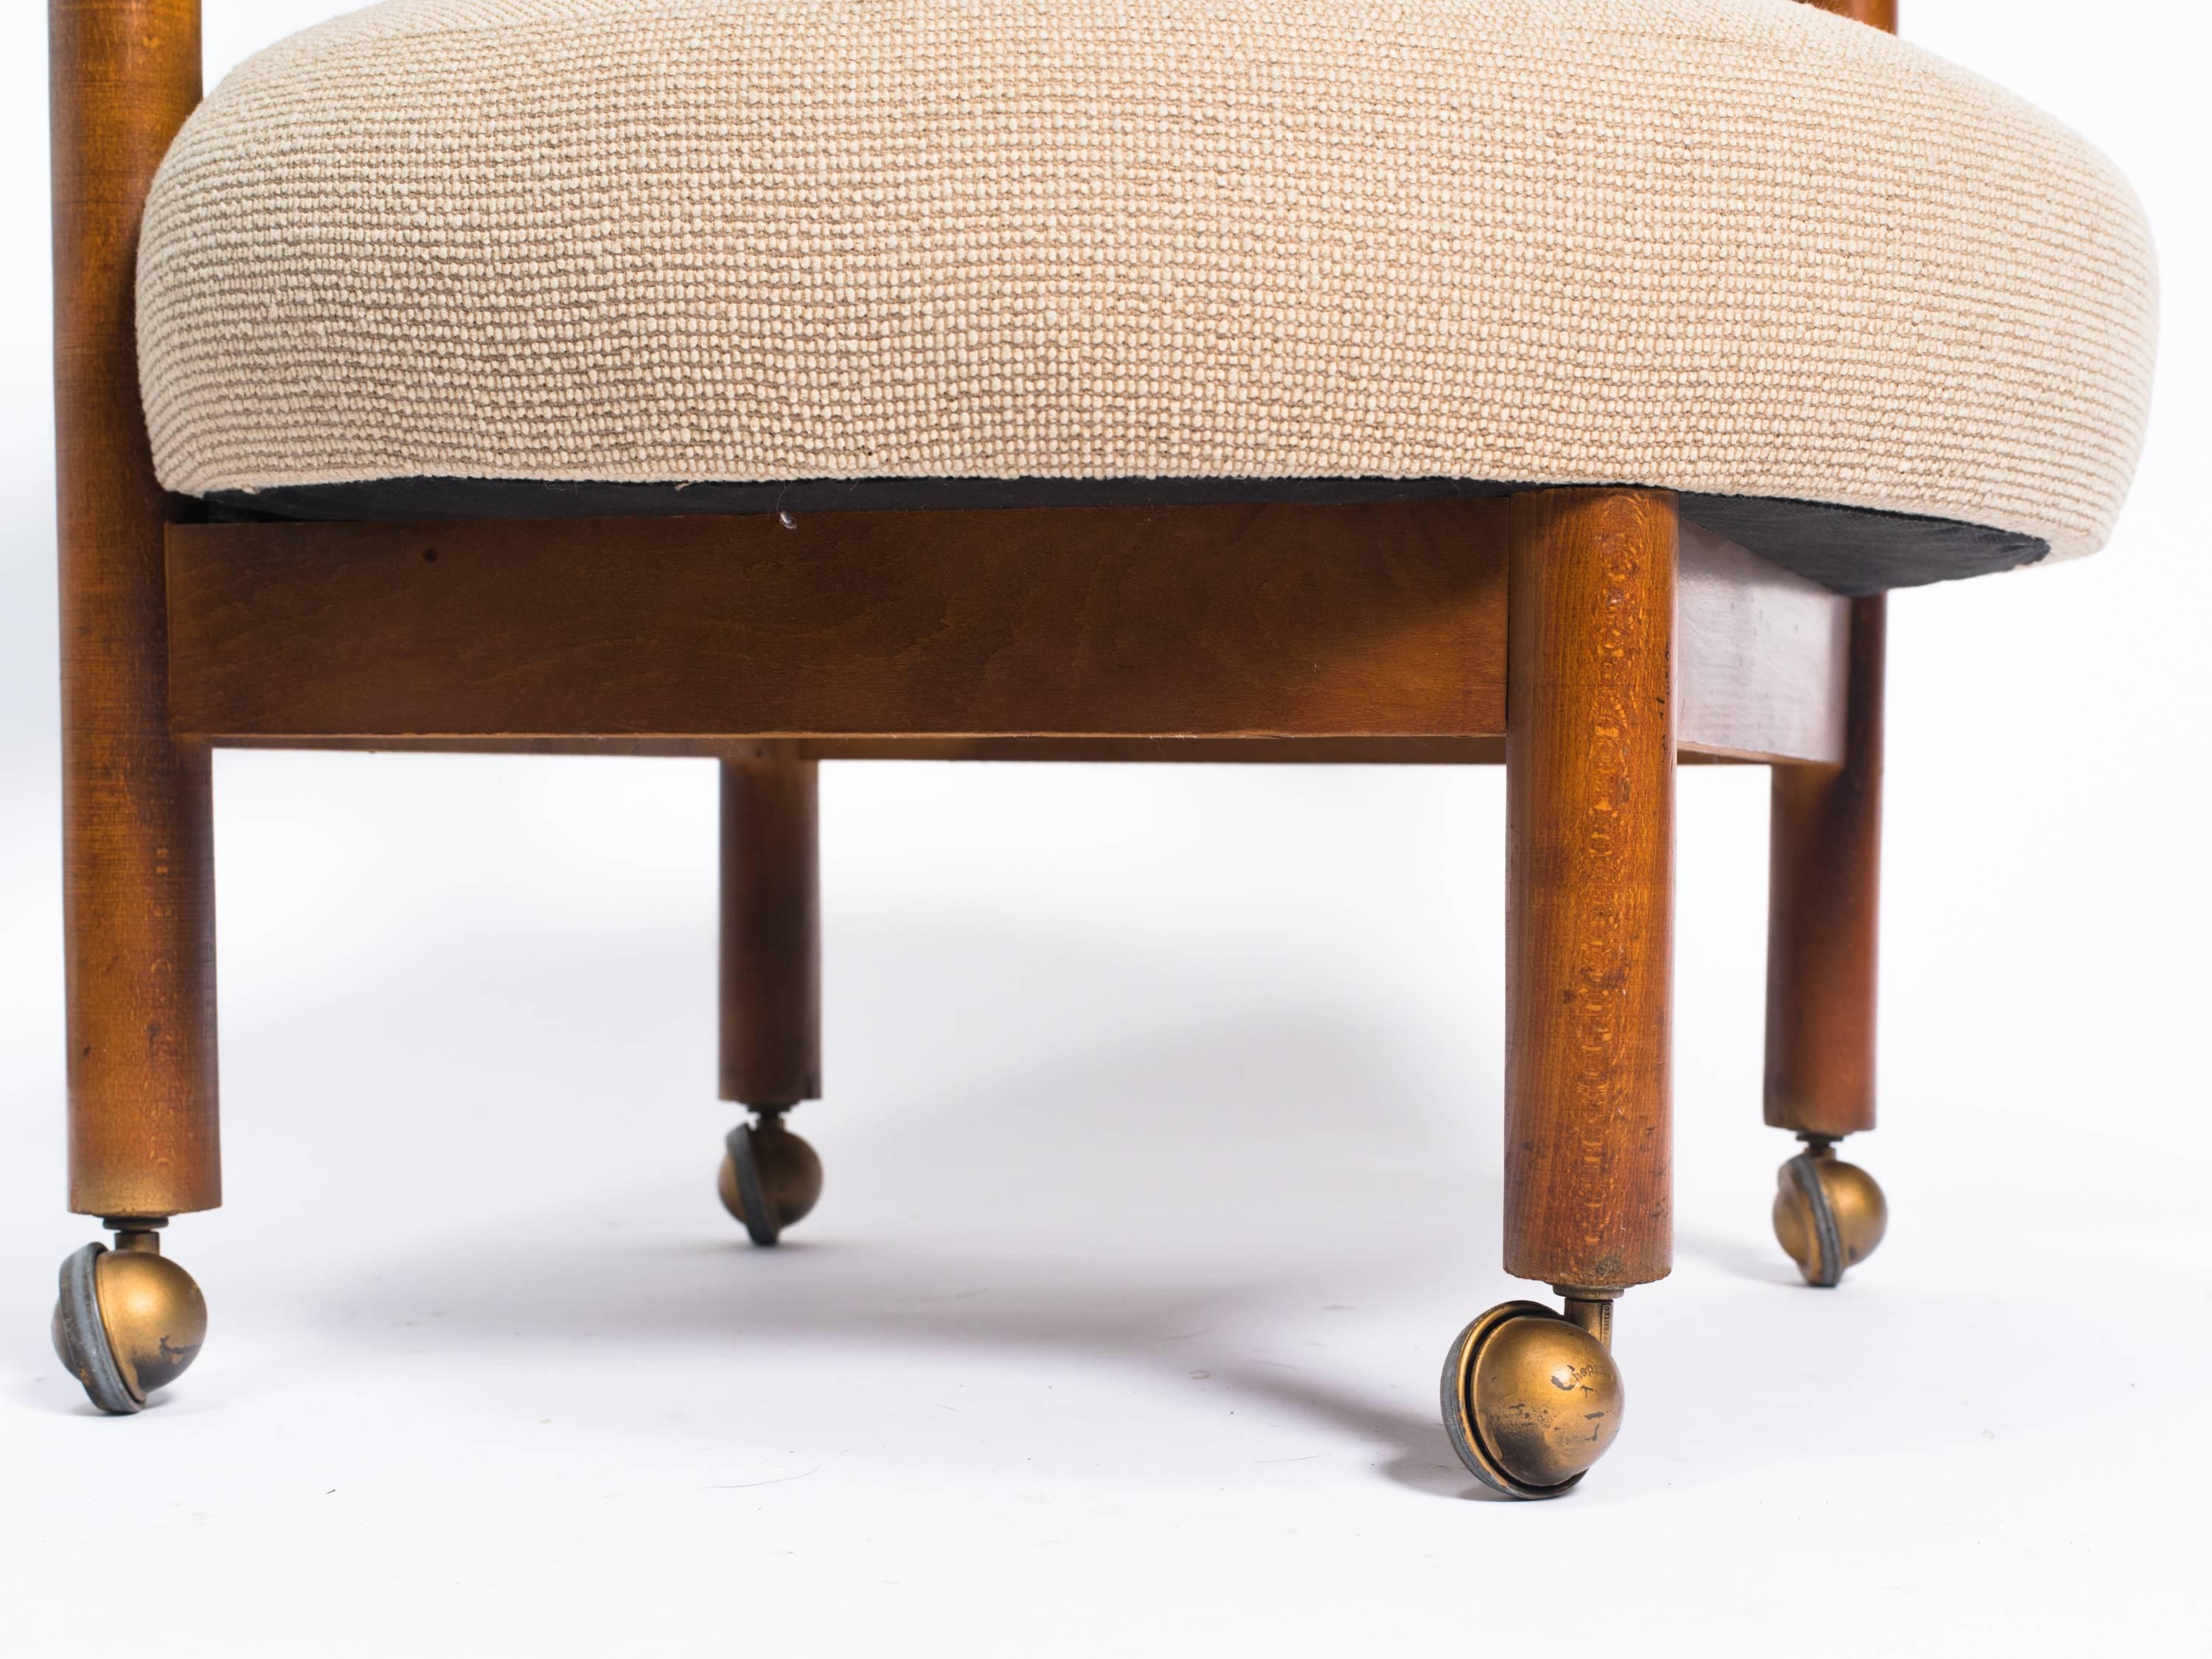 Mid-20th Century Danish Modern Occasional Chair on Casters